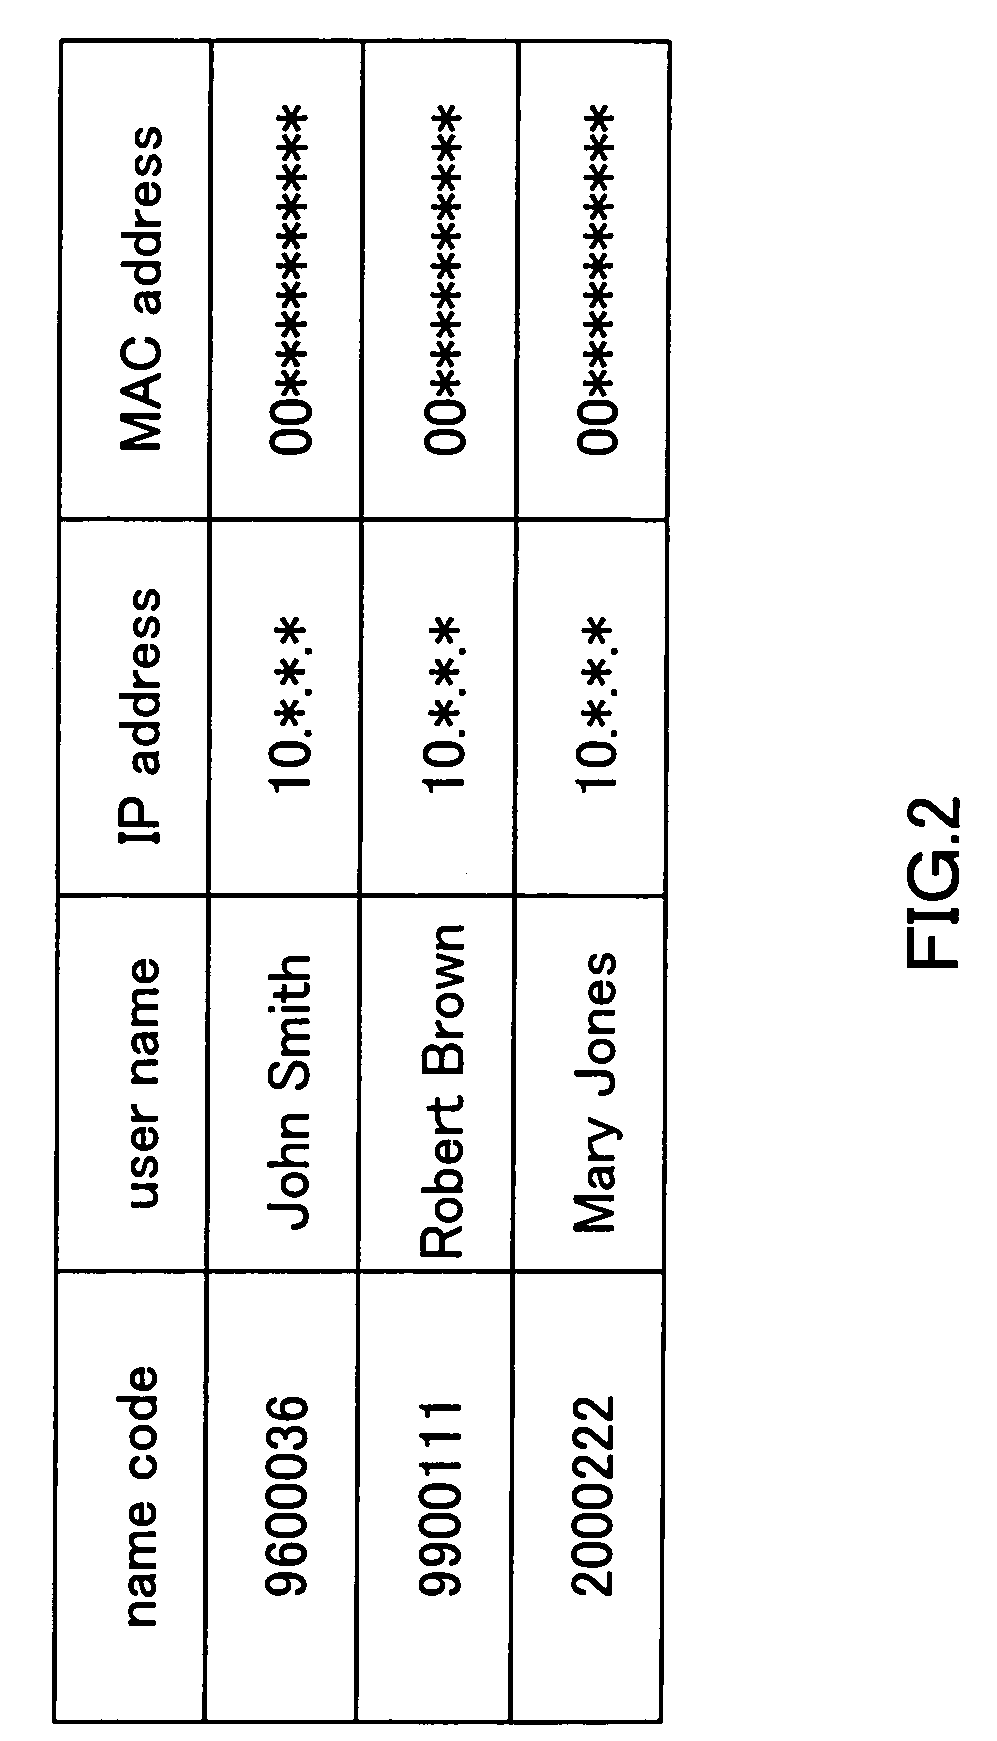 Communication control apparatus and network management system using the same